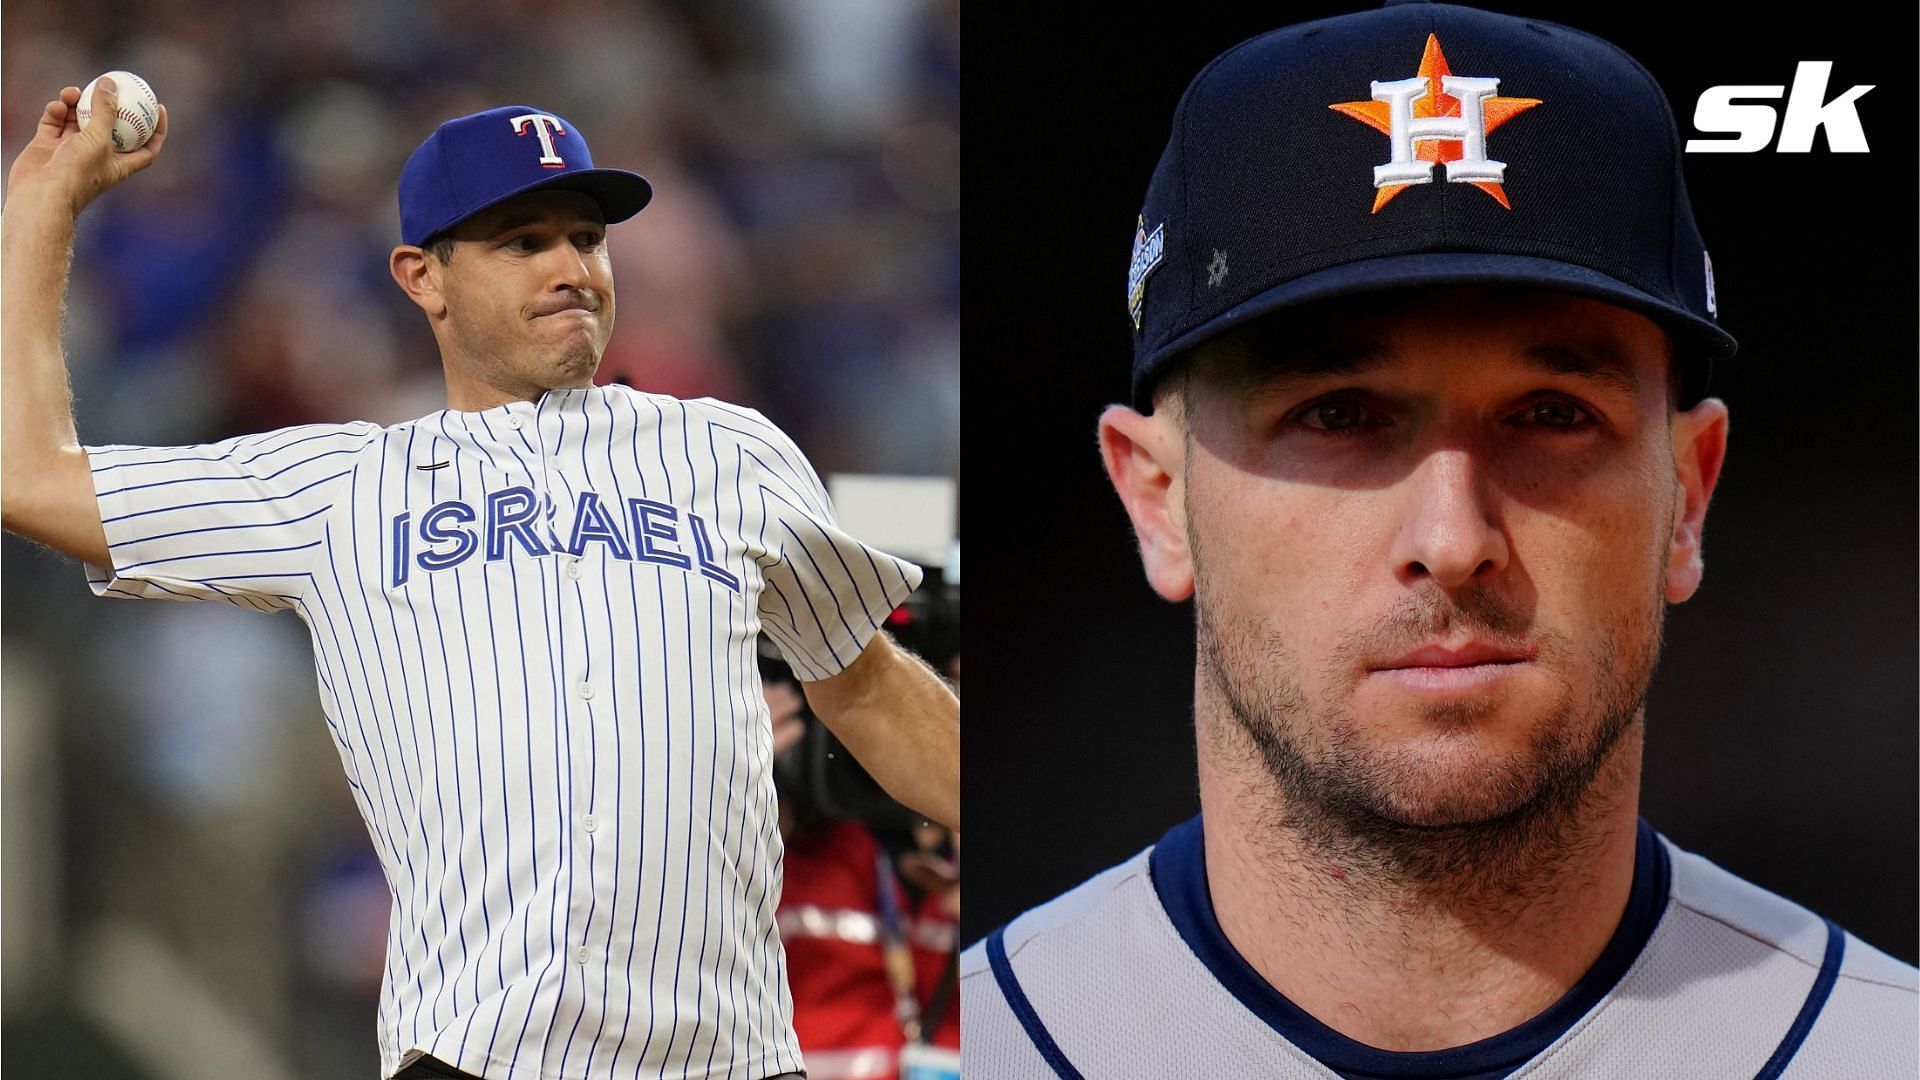 Jewish-American MLB players such as Alex Bregman created a video showing solidarity with Israel